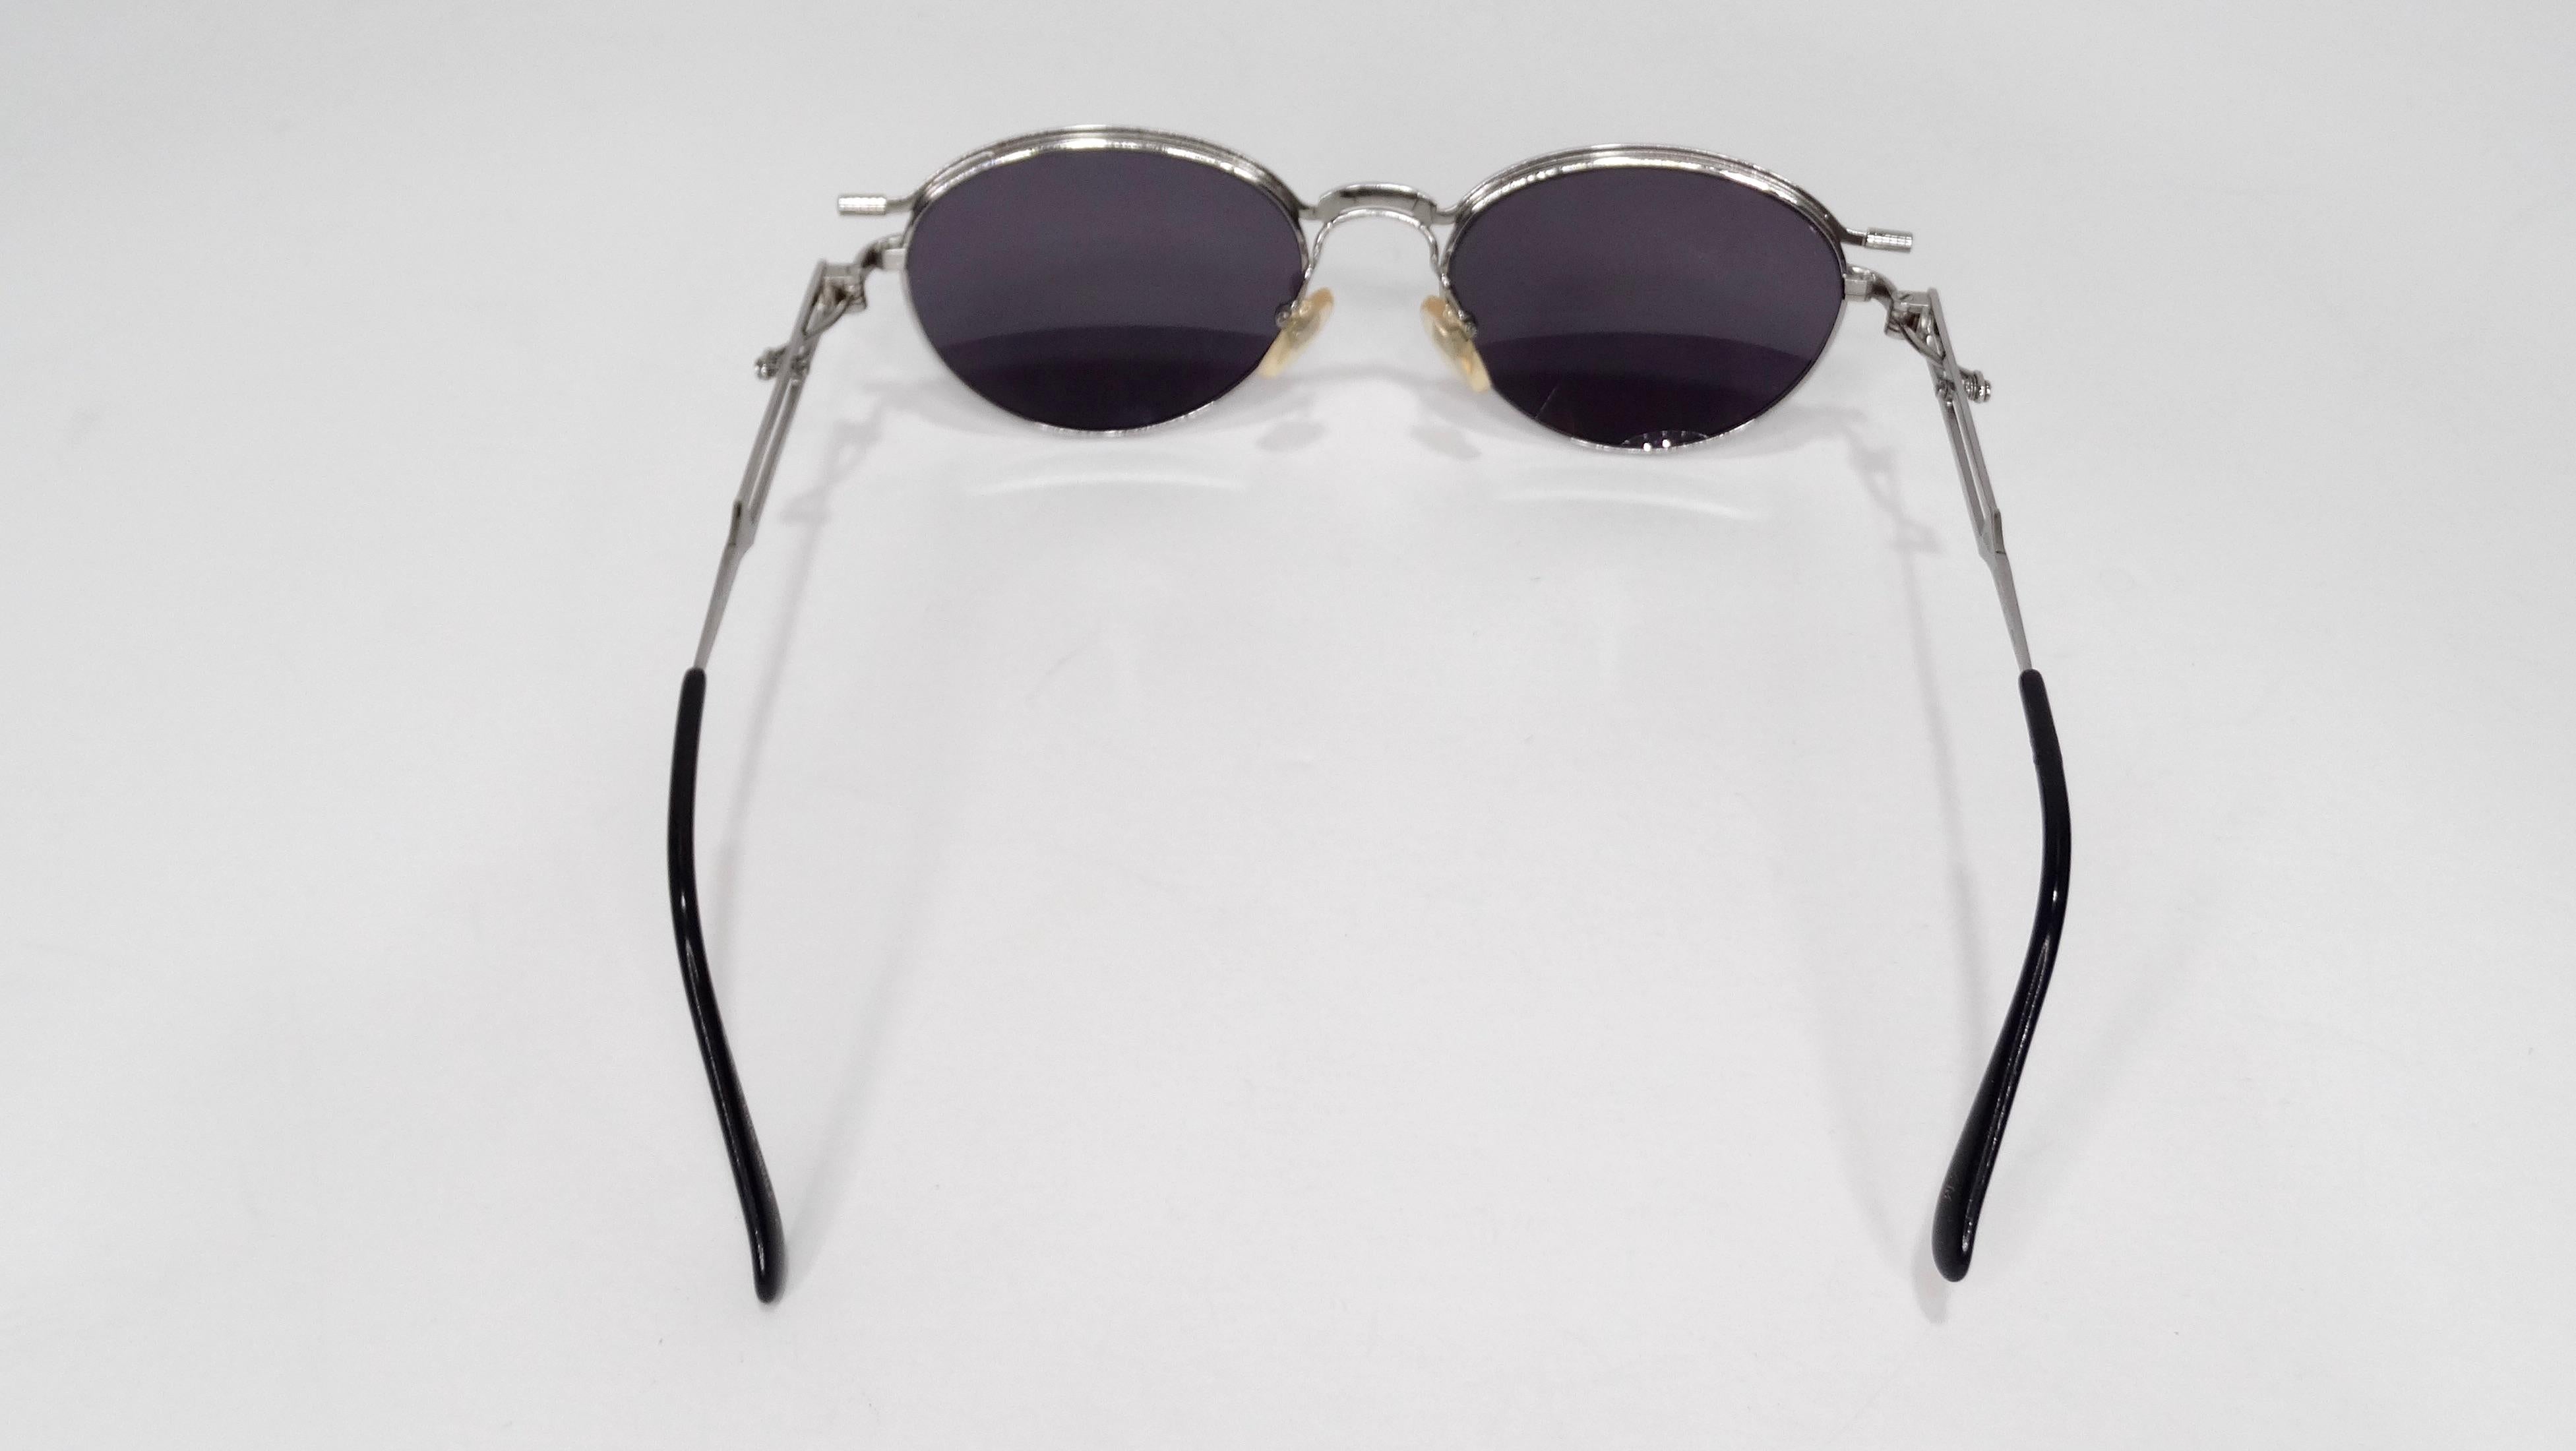 Elevate your look wit these amazing Jean Paul Gaultier sunglasses! Circa 1995, these sunglasses feature an industrial rounded frame with JPG embossed on the bridge and black lenses. A true outstanding designer piece, these sunglasses are perfect to